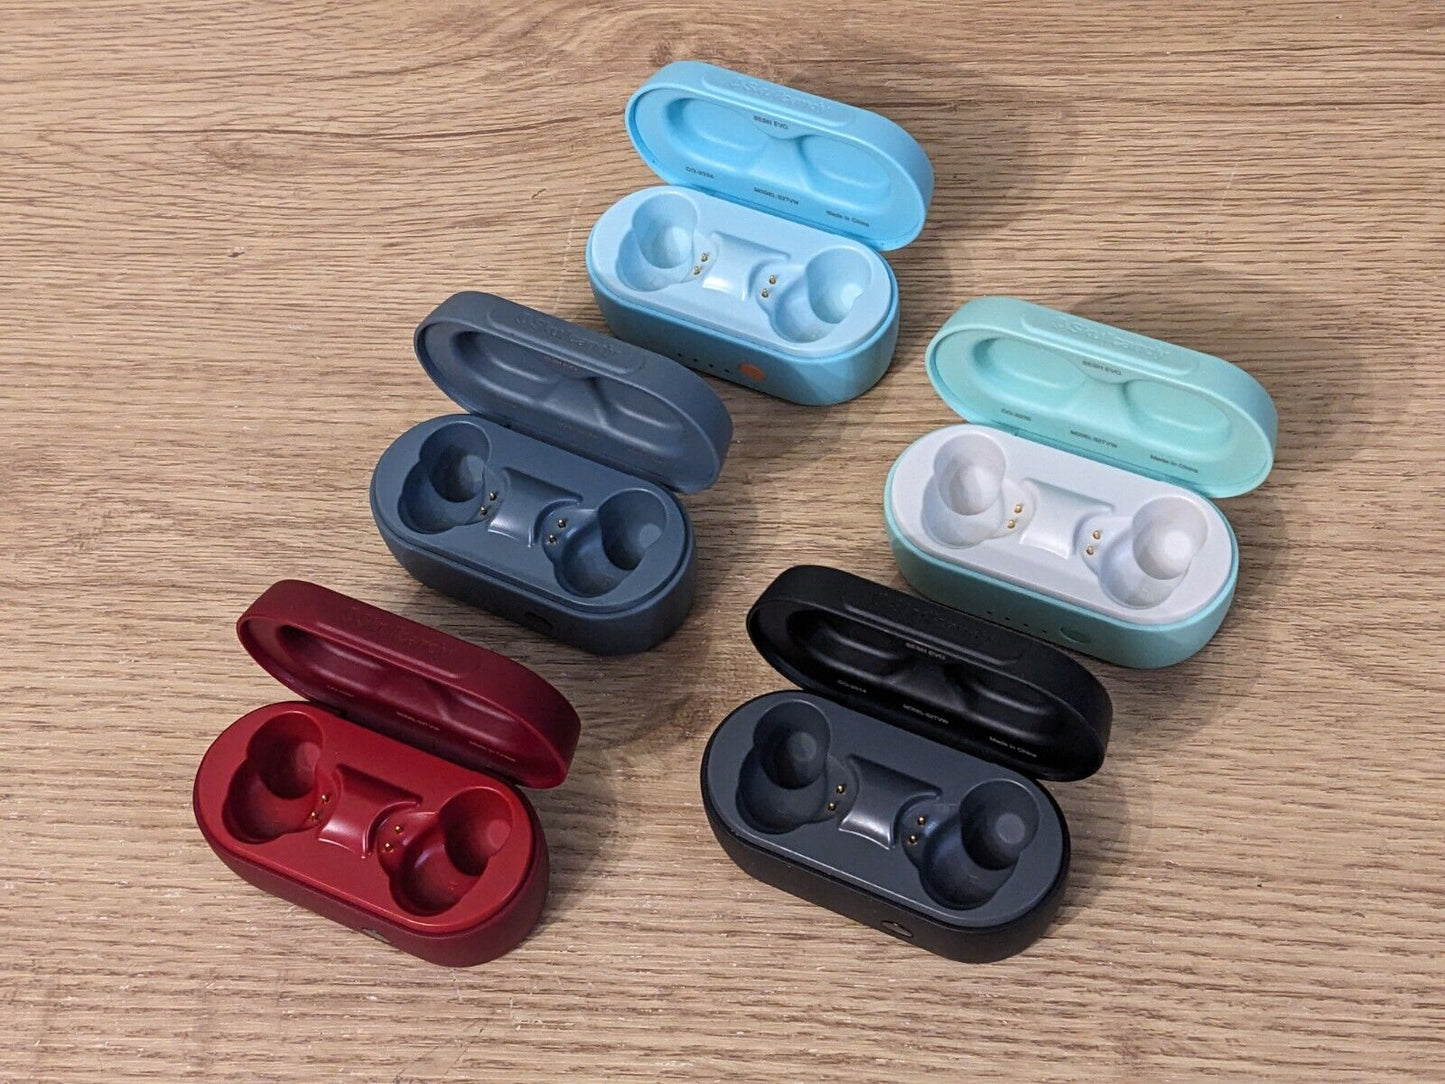 Skullcandy Sesh Evo replacement parts: charging case, left/right earbuds